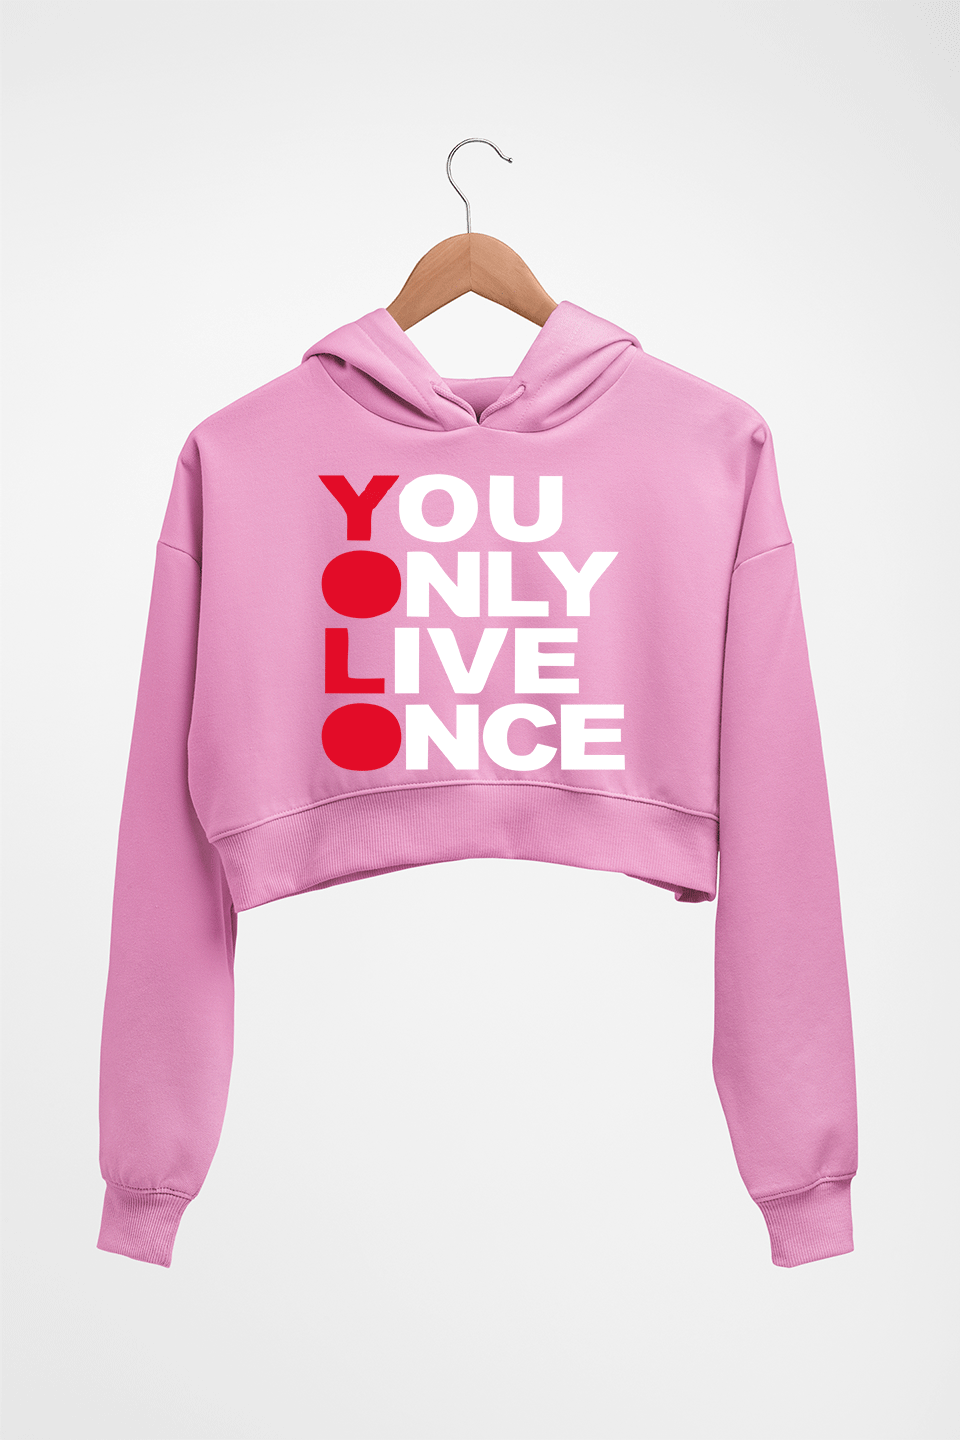 You Live Only Once(YOLO) Crop HOODIE FOR WOMEN